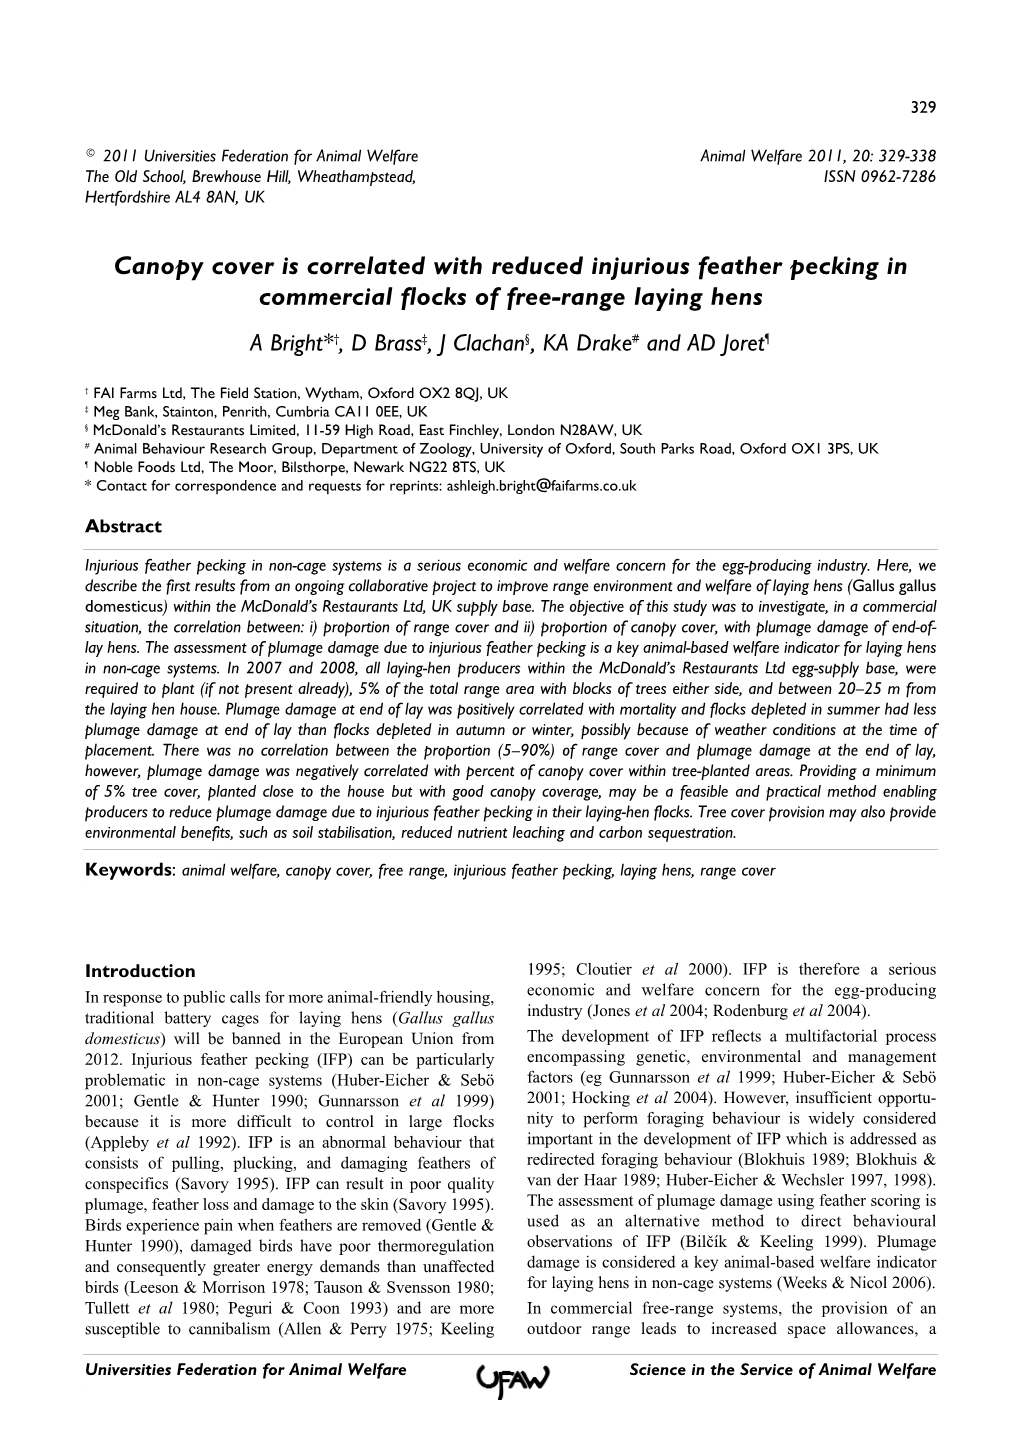 Canopy Cover Is Correlated with Reduced Injurious Feather Pecking In